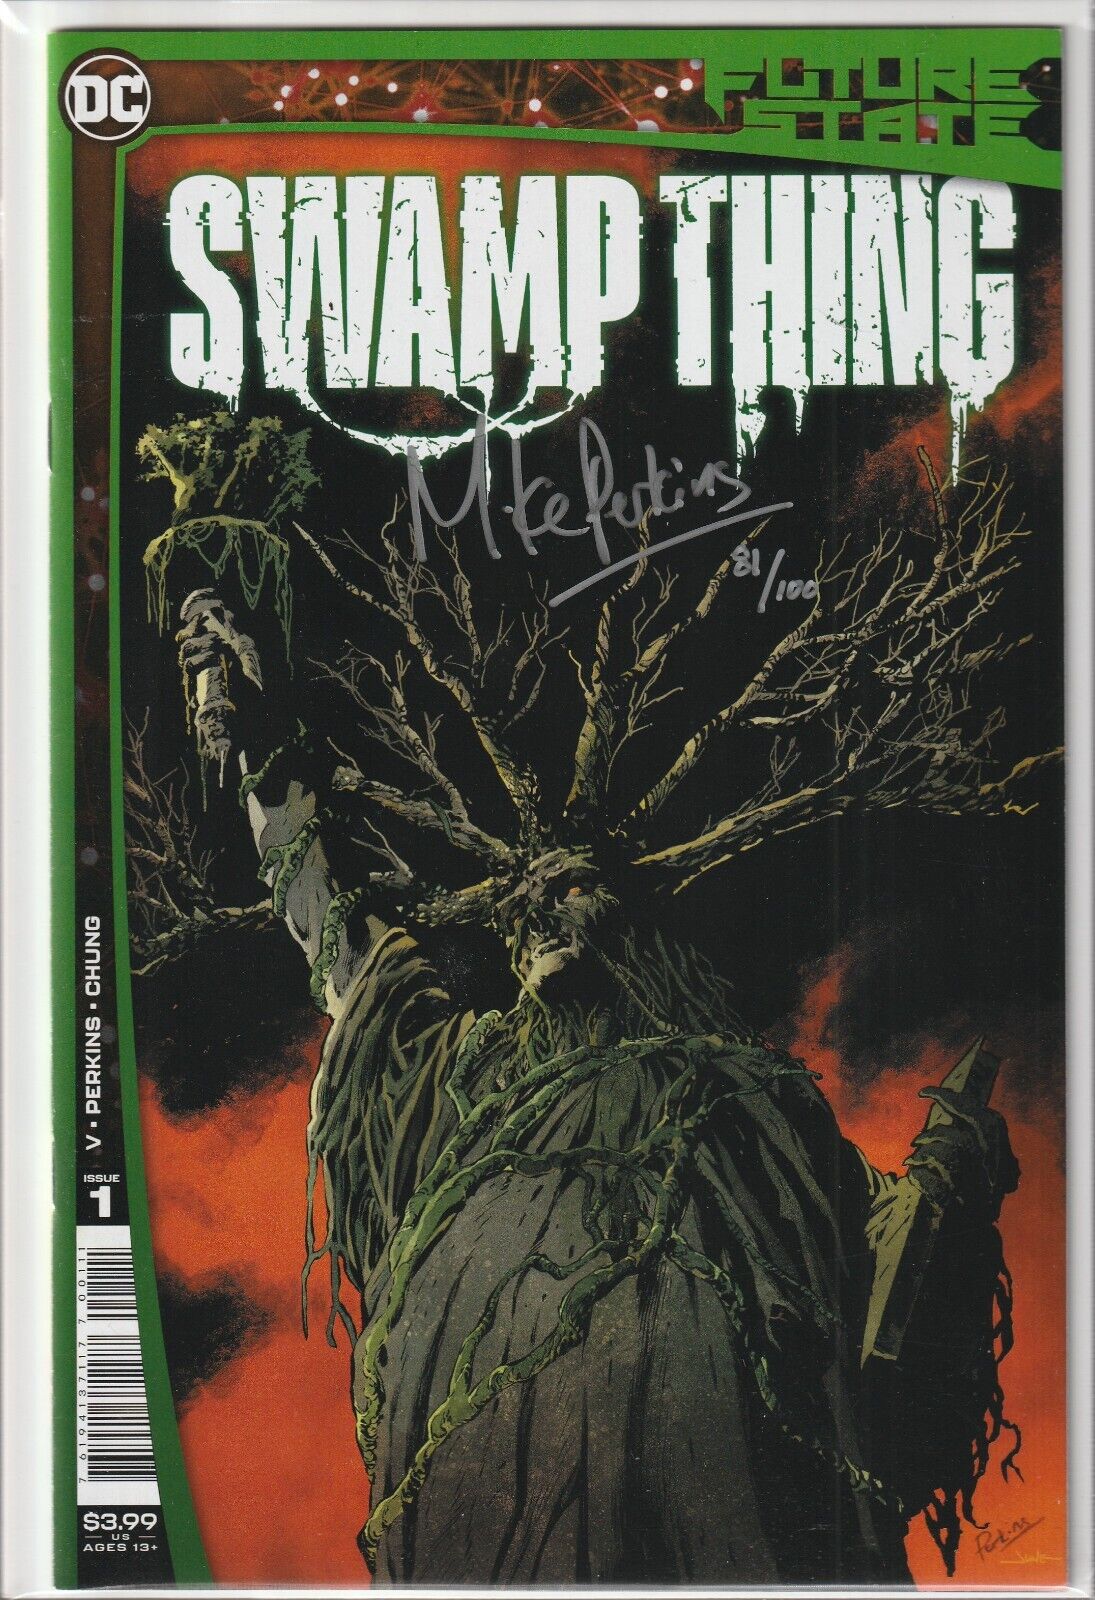 Future State Swamp Thing # 1 DF Cover NM DC Signed Mike Perkins 81/100 [V6]